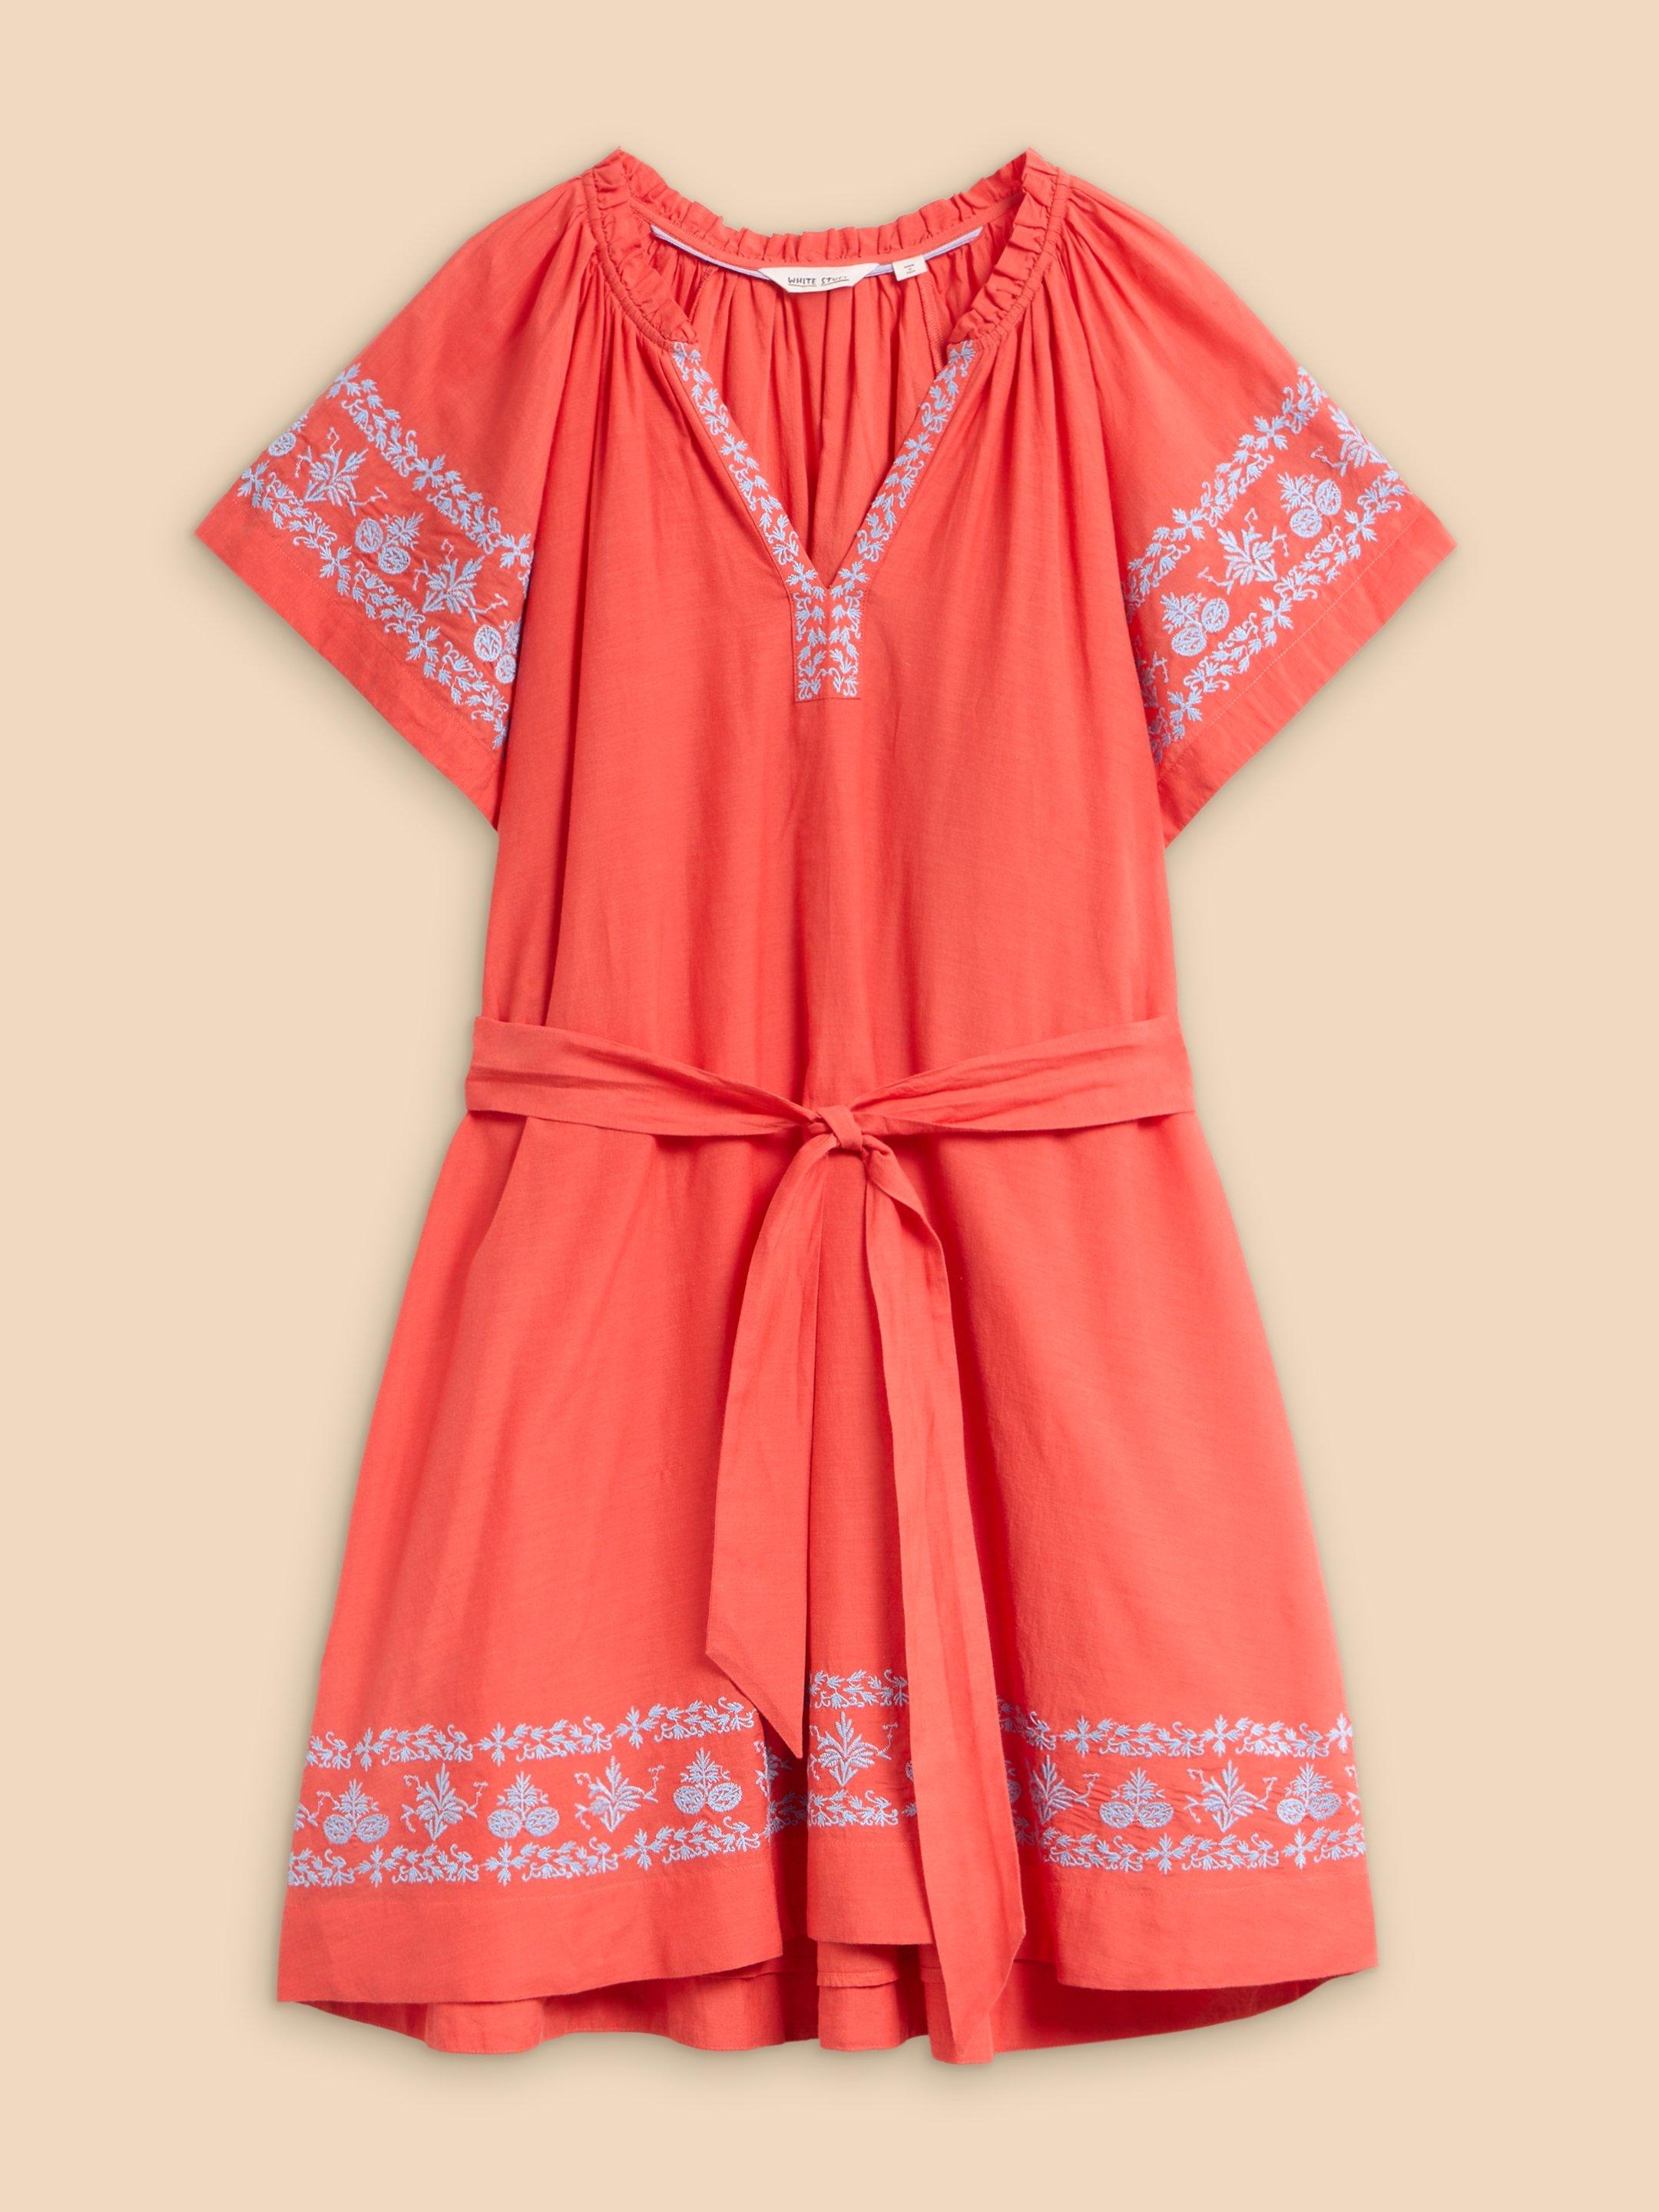 Anna Cotton Embroidered Dress in ORANGE MLT - FLAT FRONT